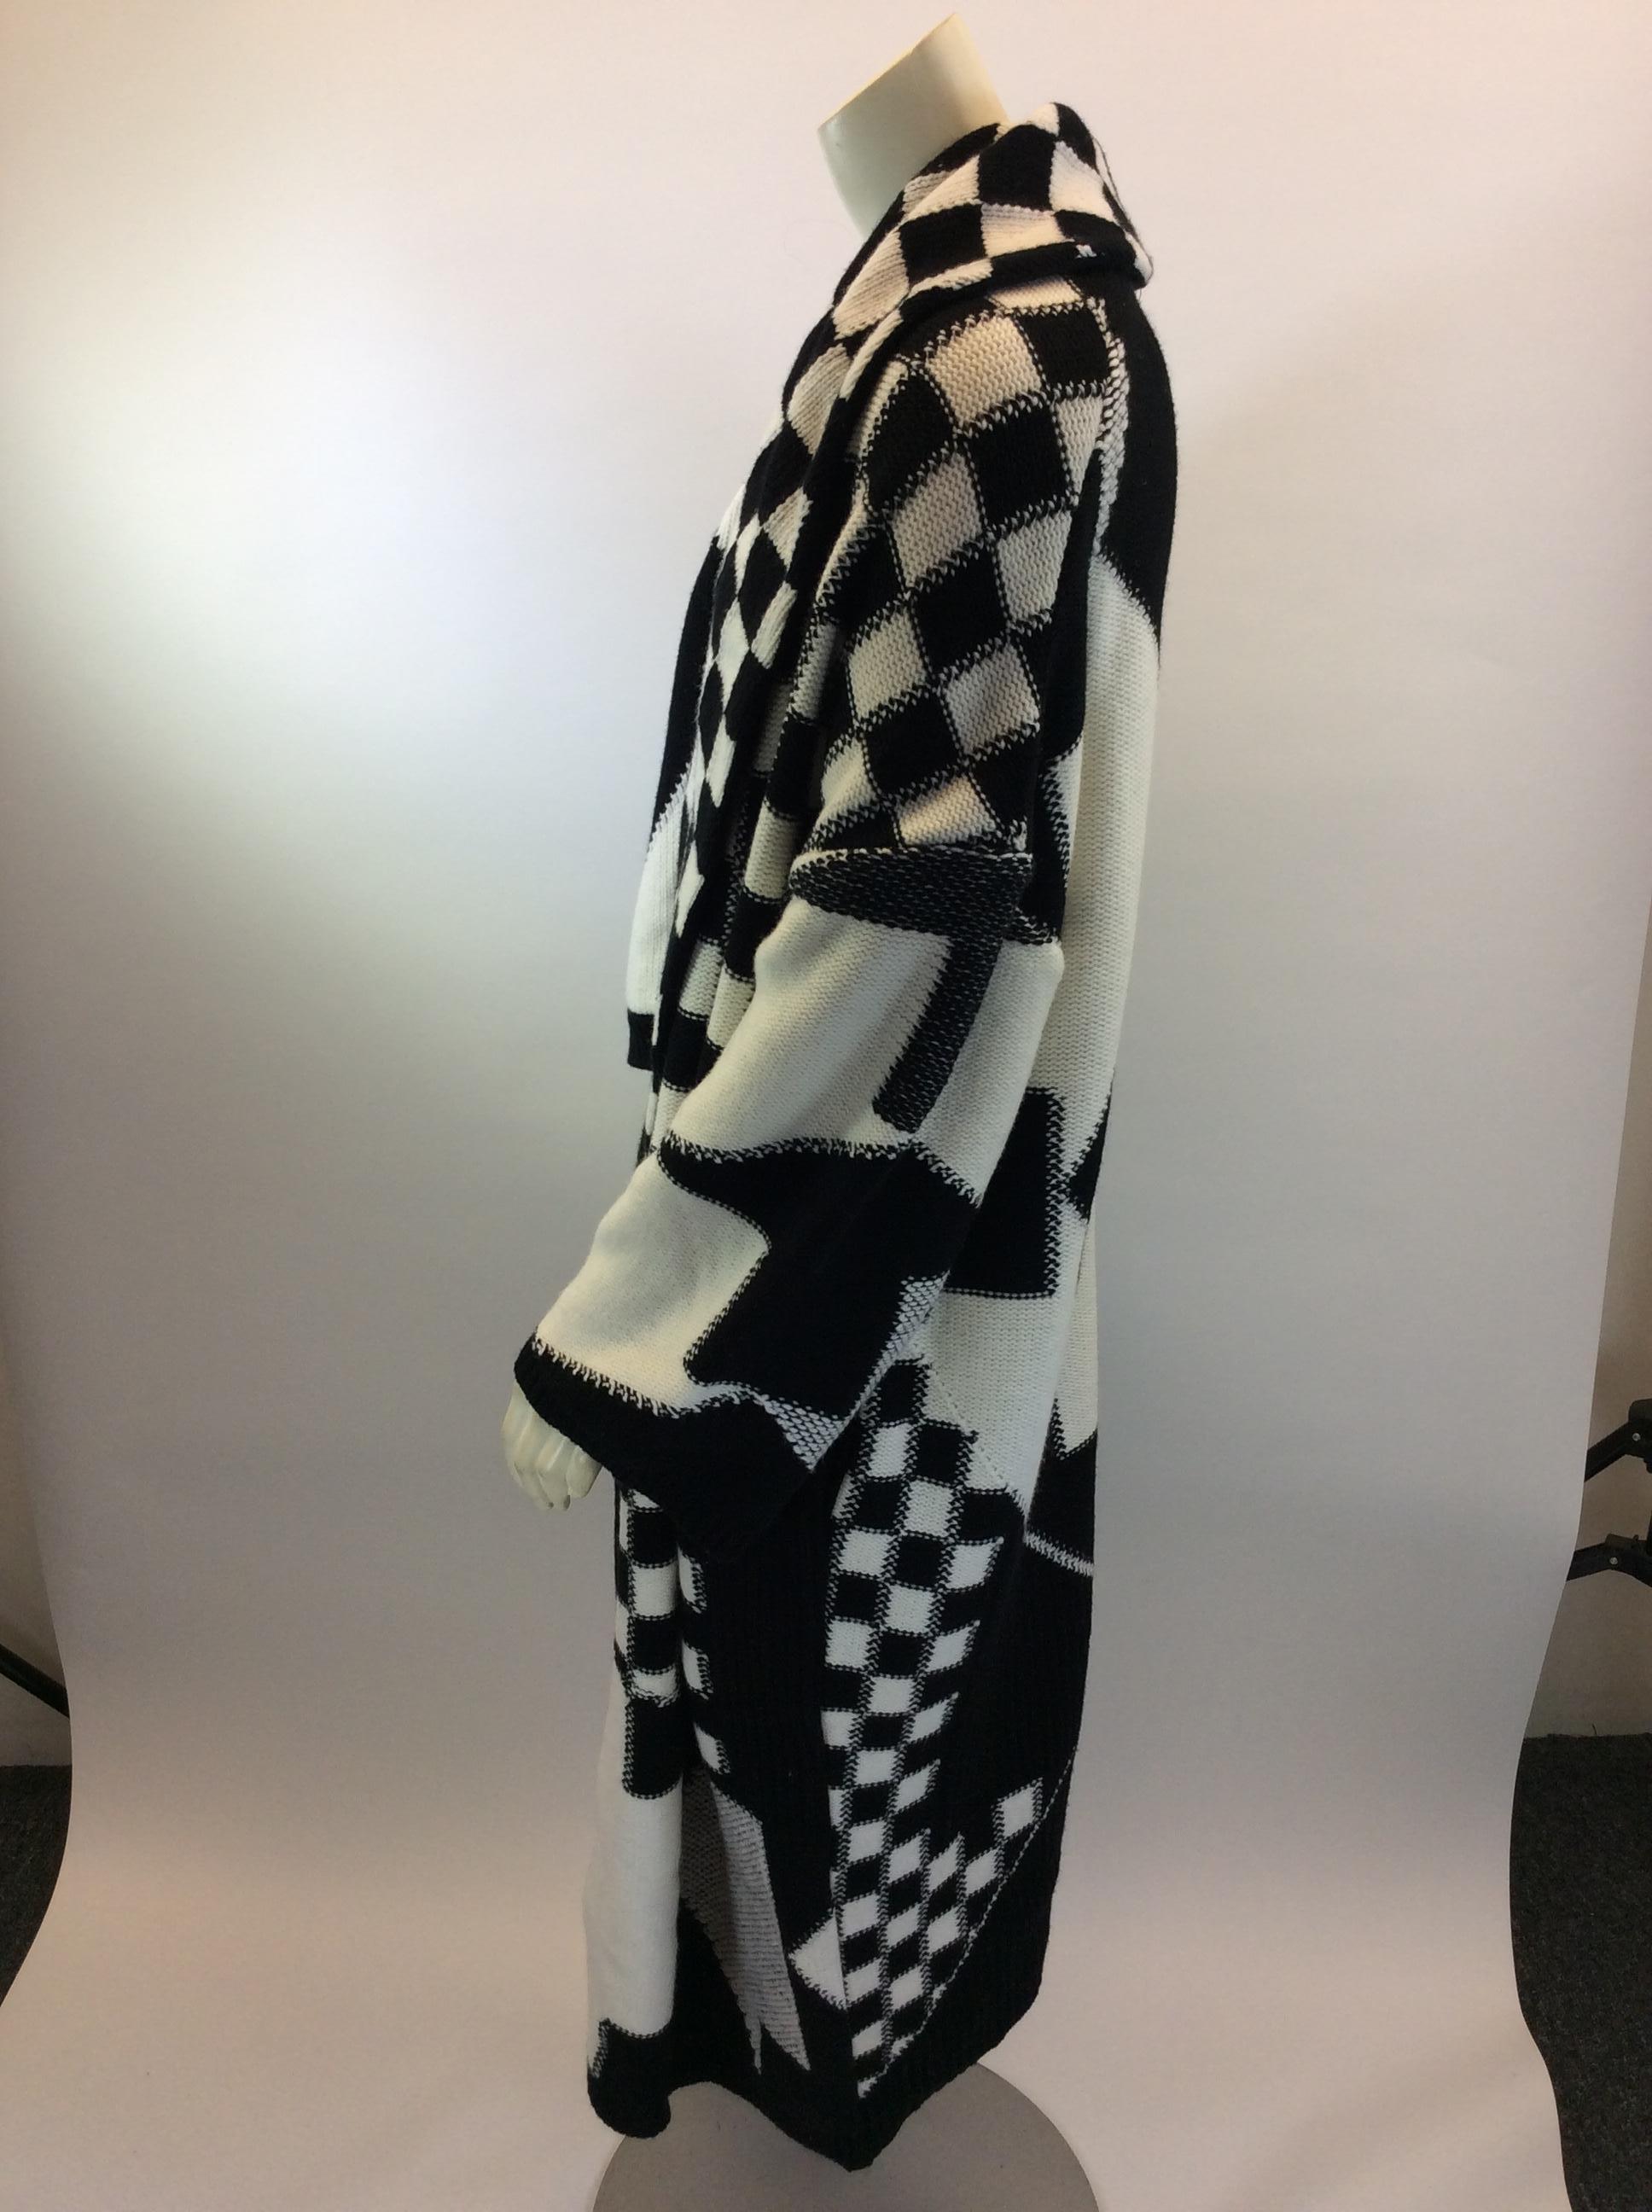 Stella McCartney Black and White Wool Cardigan
$999
Made in Italy
100% Wool
Size Small
Length 45